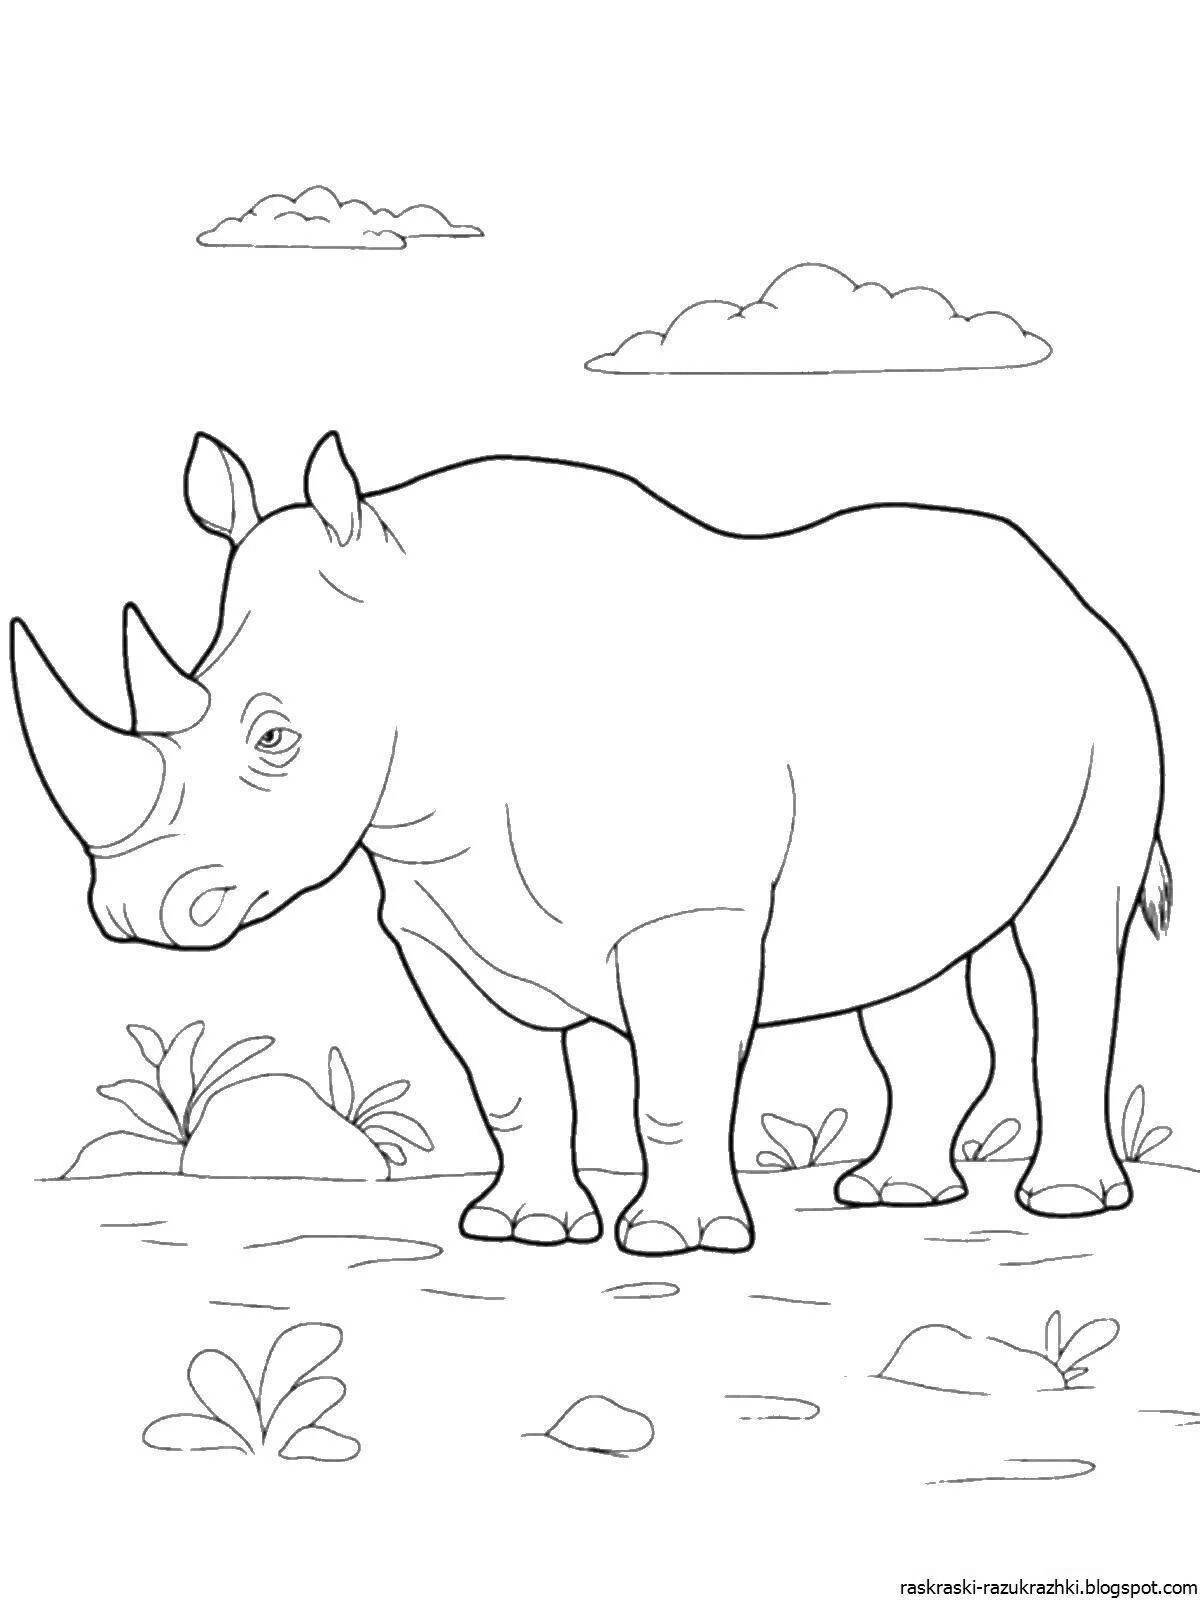 Amazing coloring pages animals of hot countries for children 4 years old